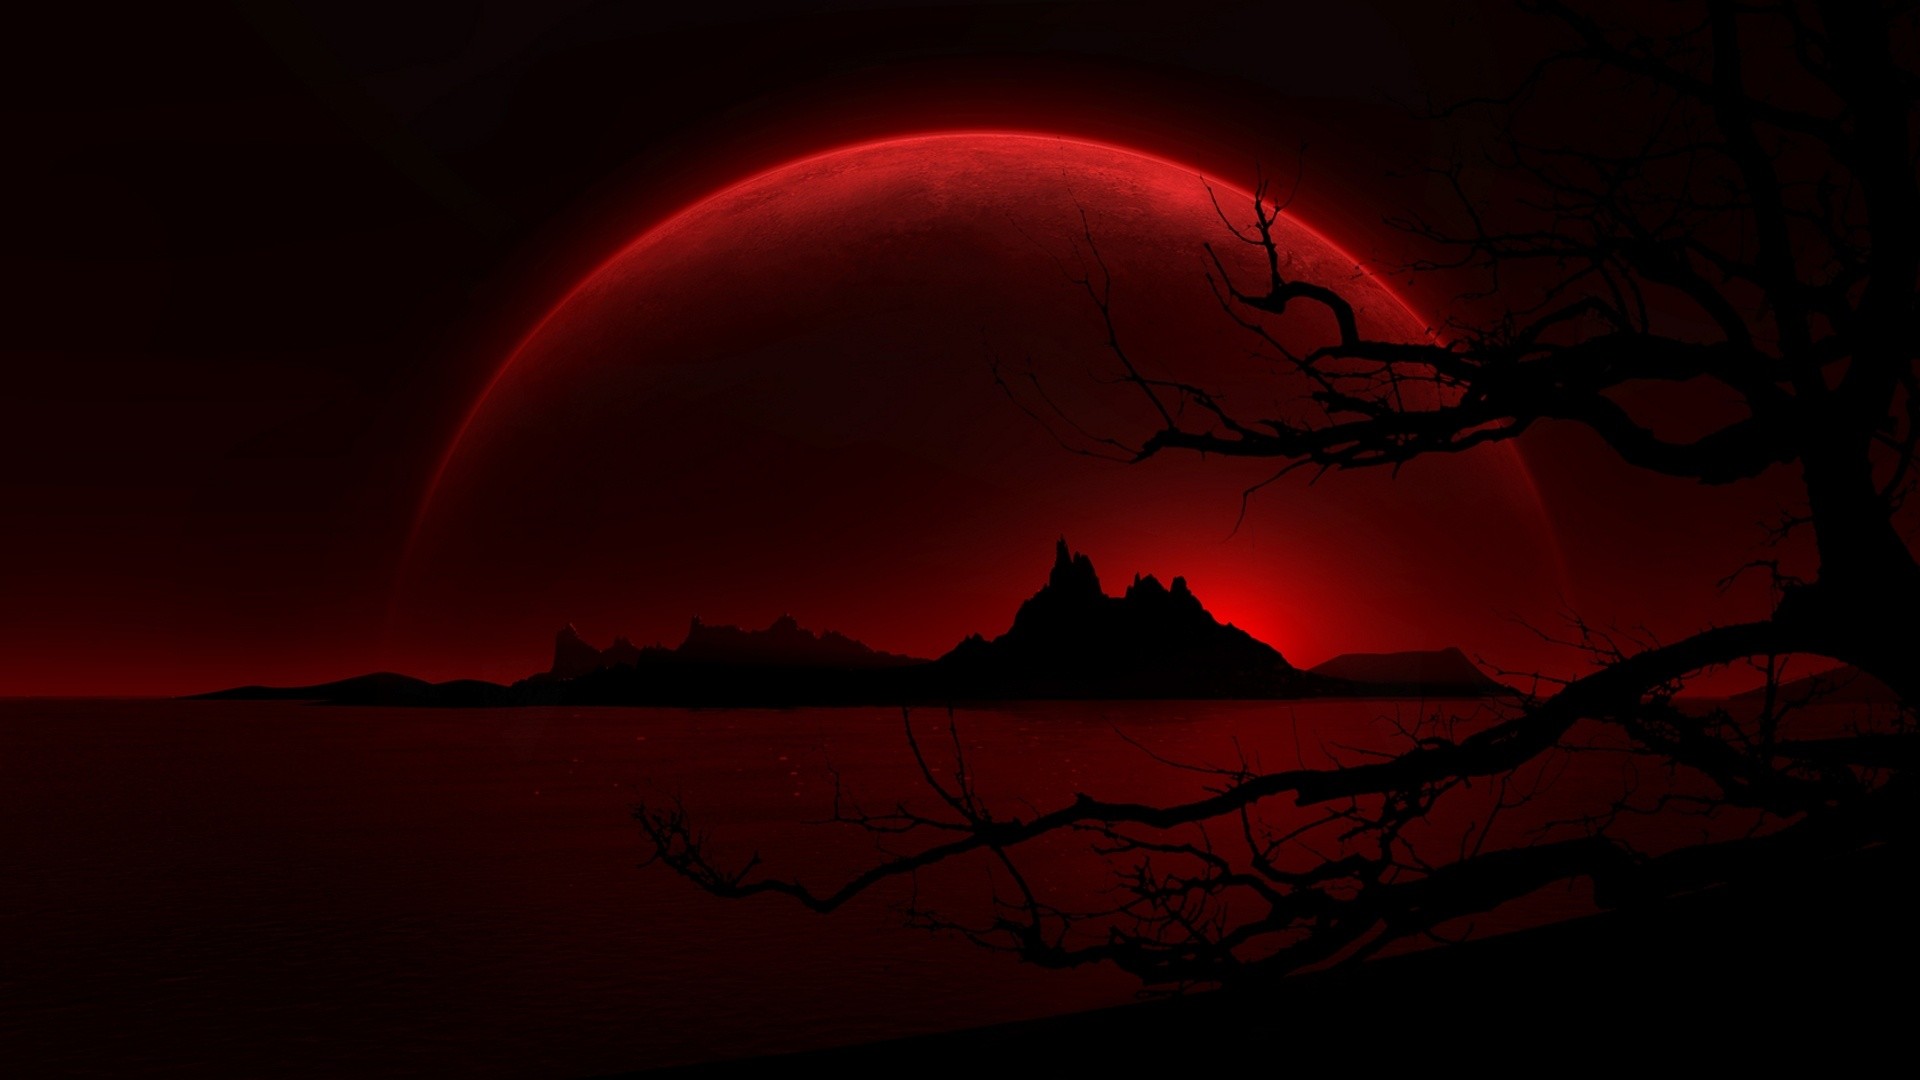 1920x1080 Red Moon Wallpaper 3443 Hd Wallpapers in Space - Imagesci.com